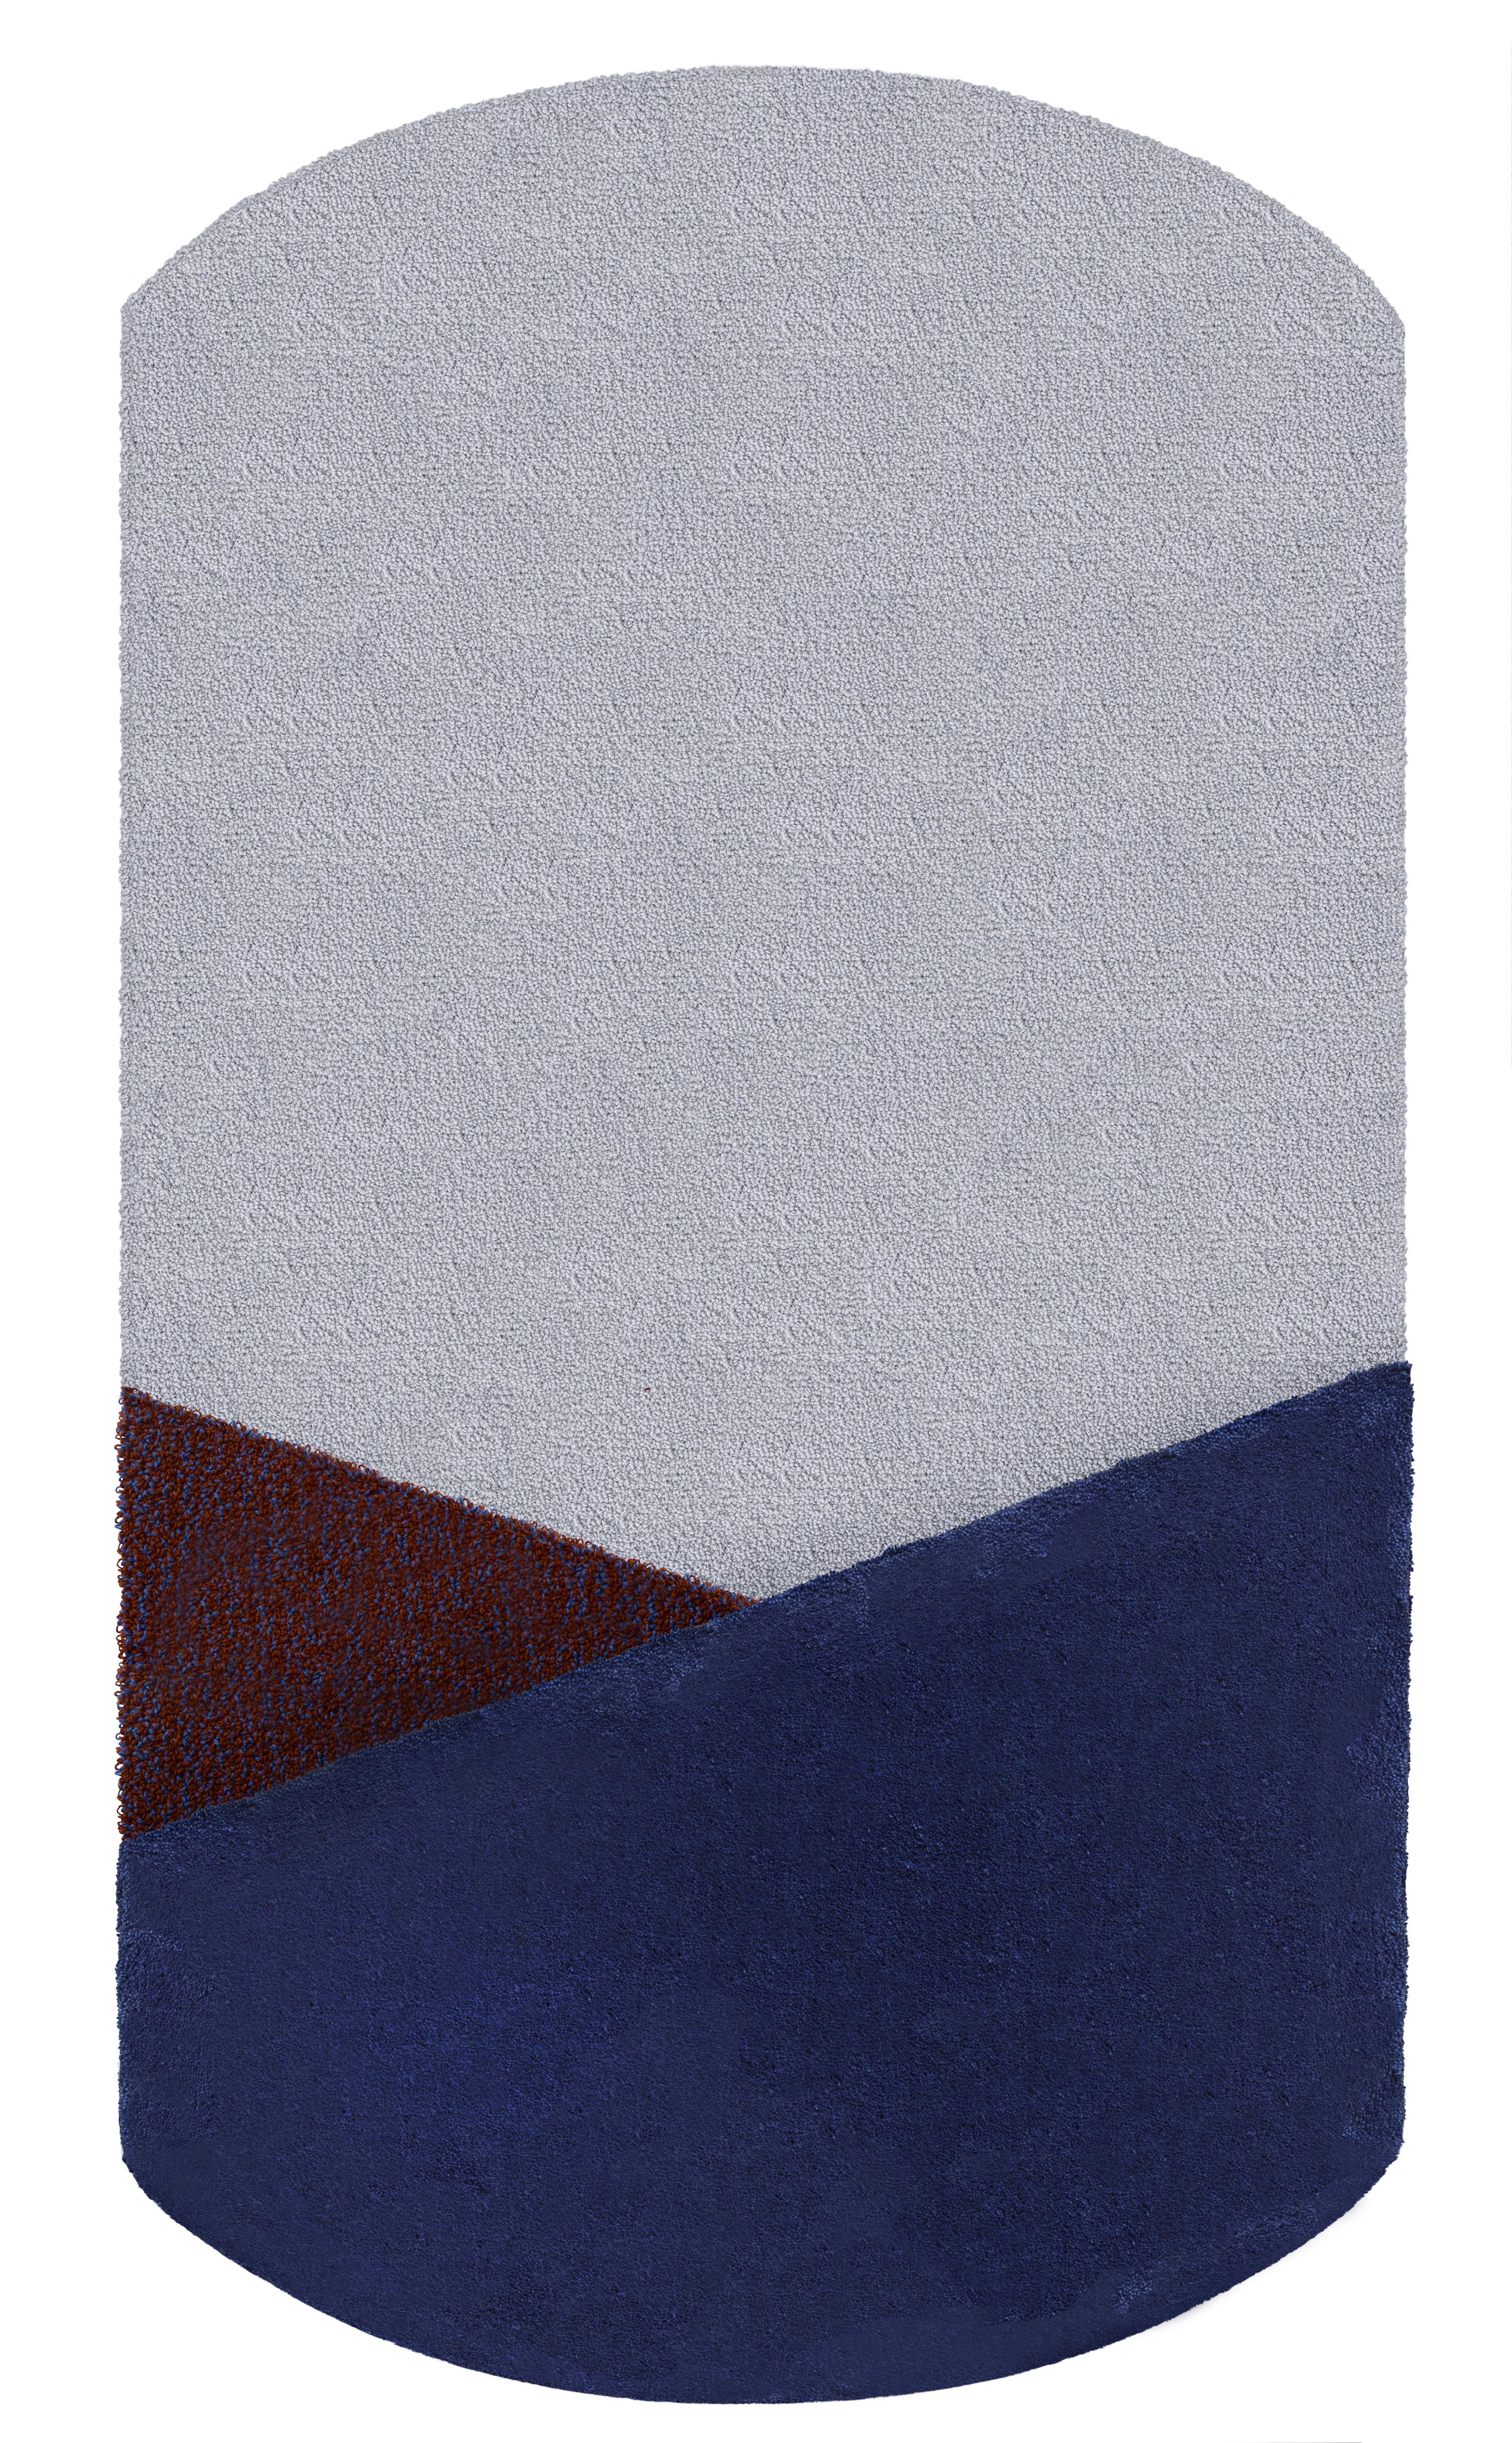 Blue Center oci rug by Seraina Lareida
Dimensions: 70 x 130 cm
Materials: 100% New Zealand top quality wool
Available in sizes Medium (110 x 200cm), and Large (150 x 280cm). Also available in colors: Brick/Pink, Yellow/Gray, Bordeaux/Ecru and,